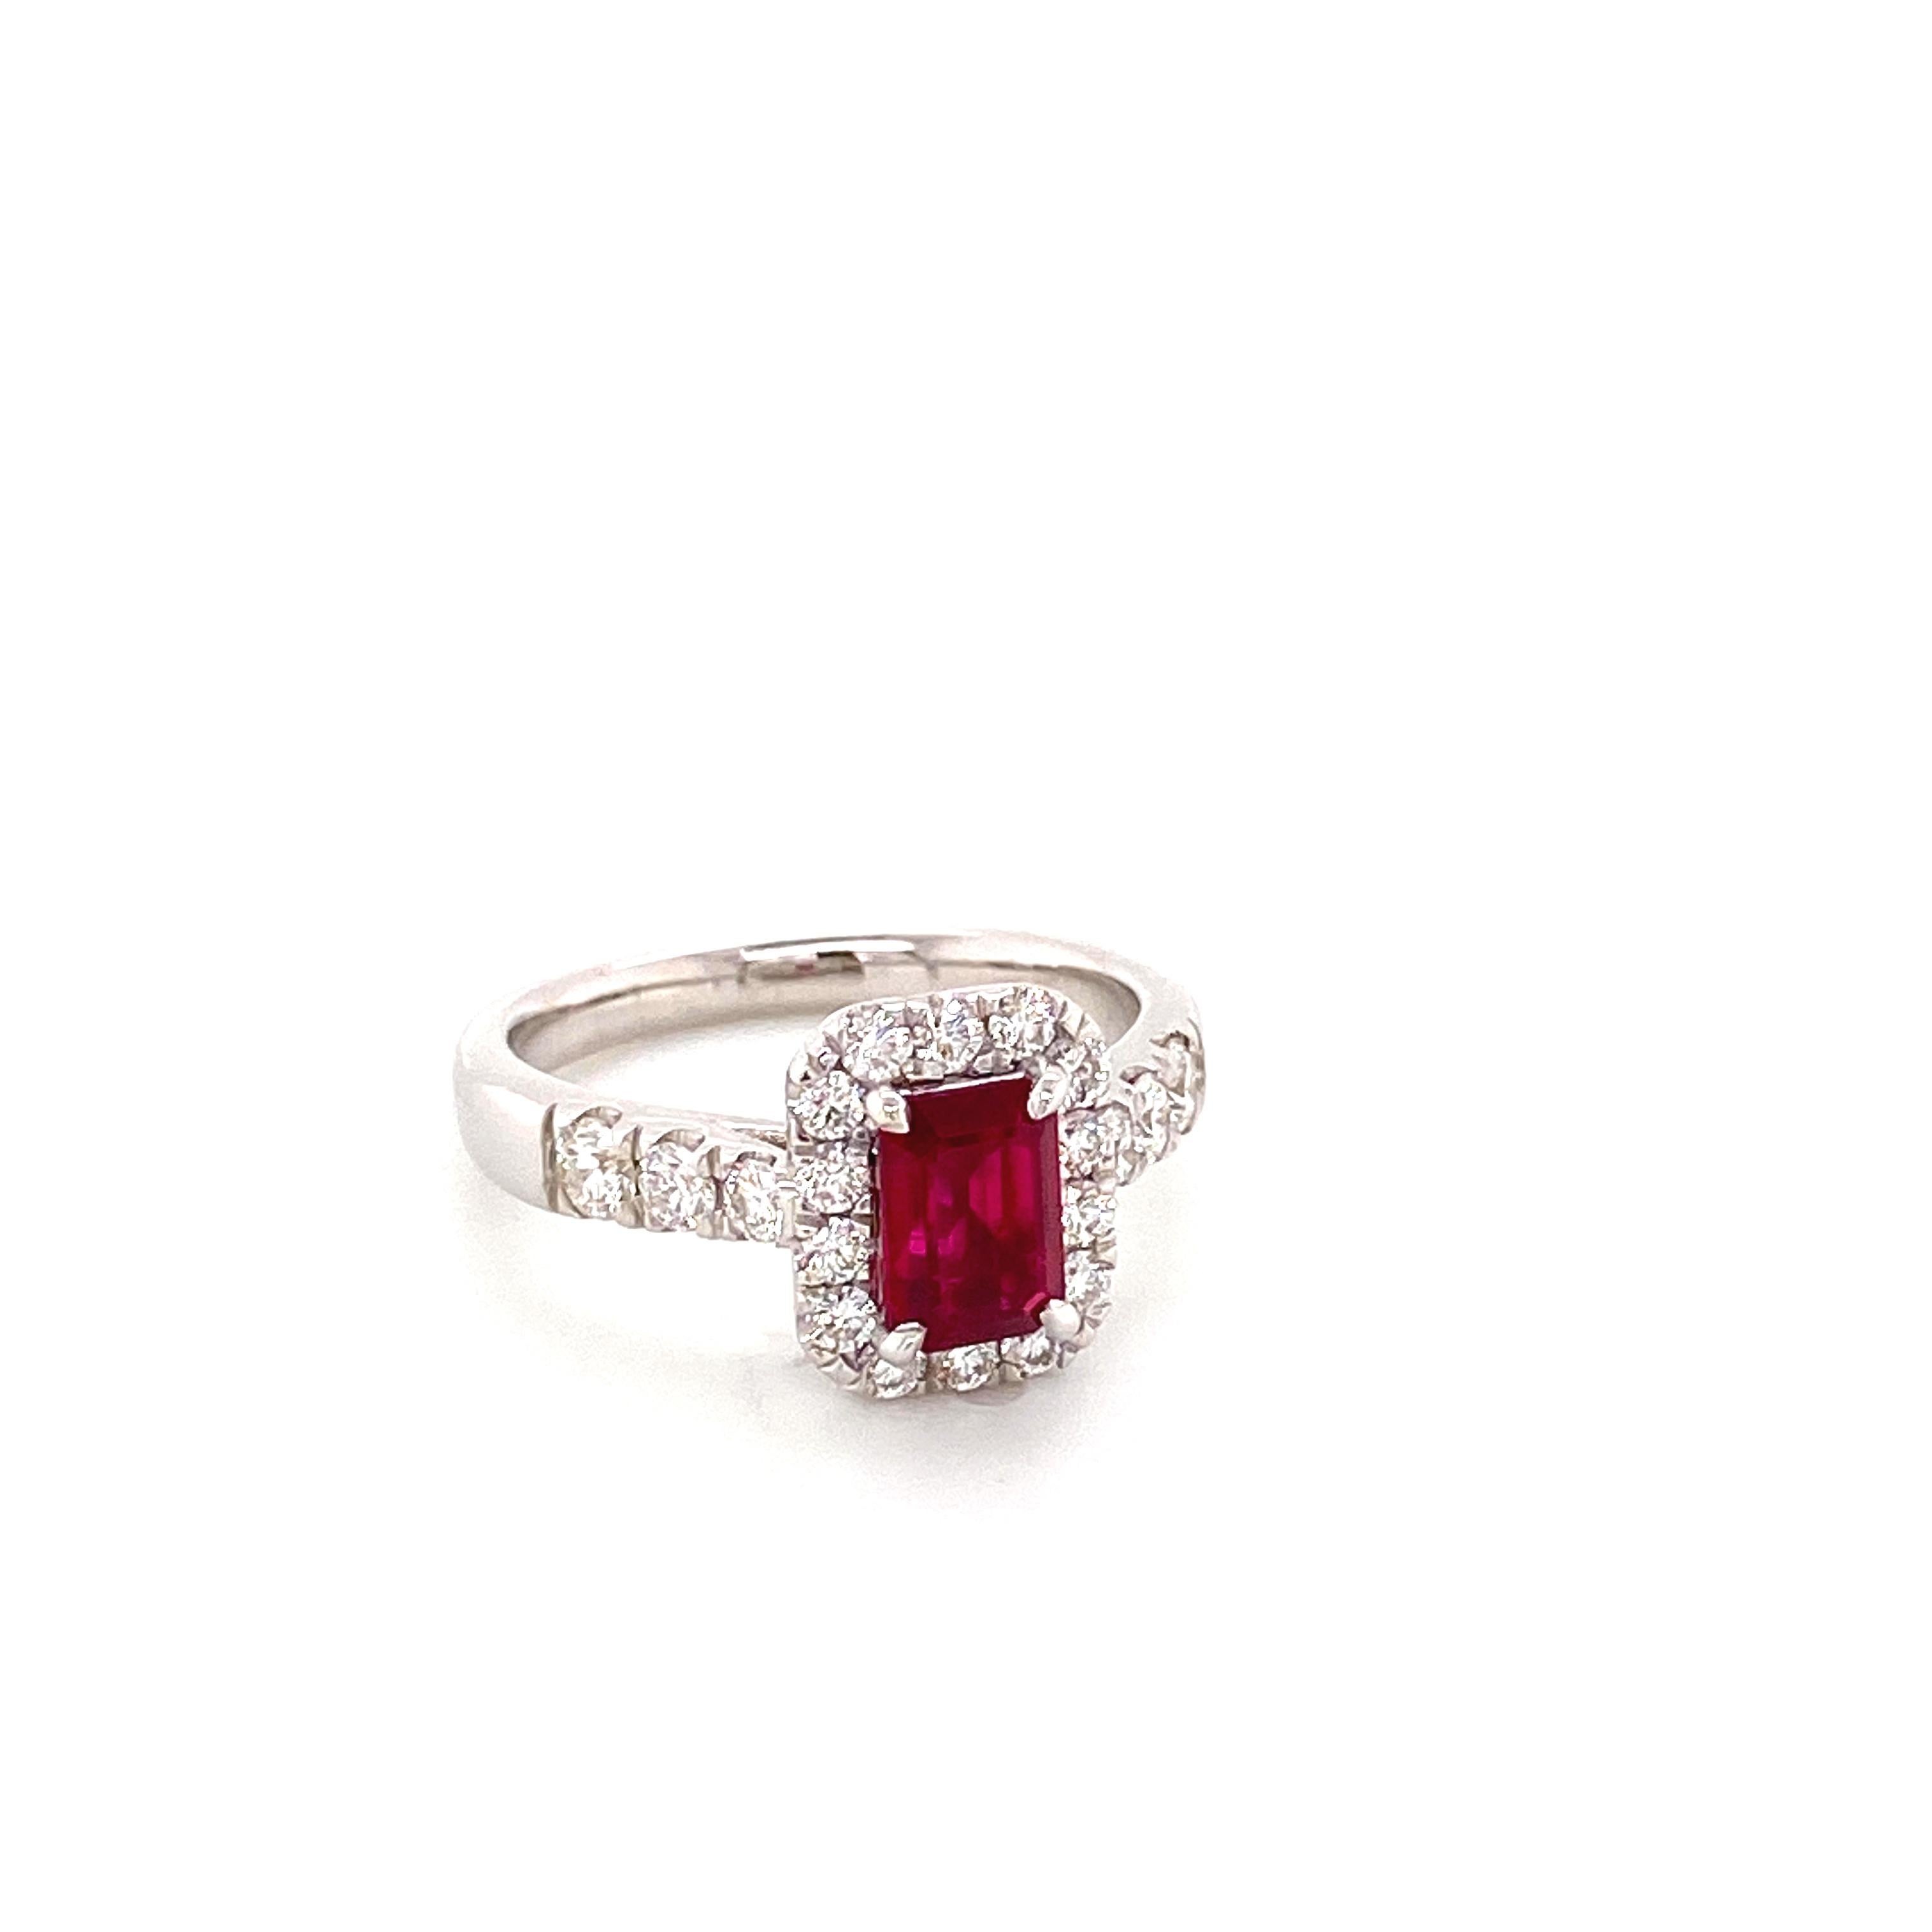 1.28 Carat GRS Certified Pigeon's Blood Burmese Ruby and Diamond Engagement Ring:

A beautiful and rare ring, it features an exquisite GRS Lab certified 